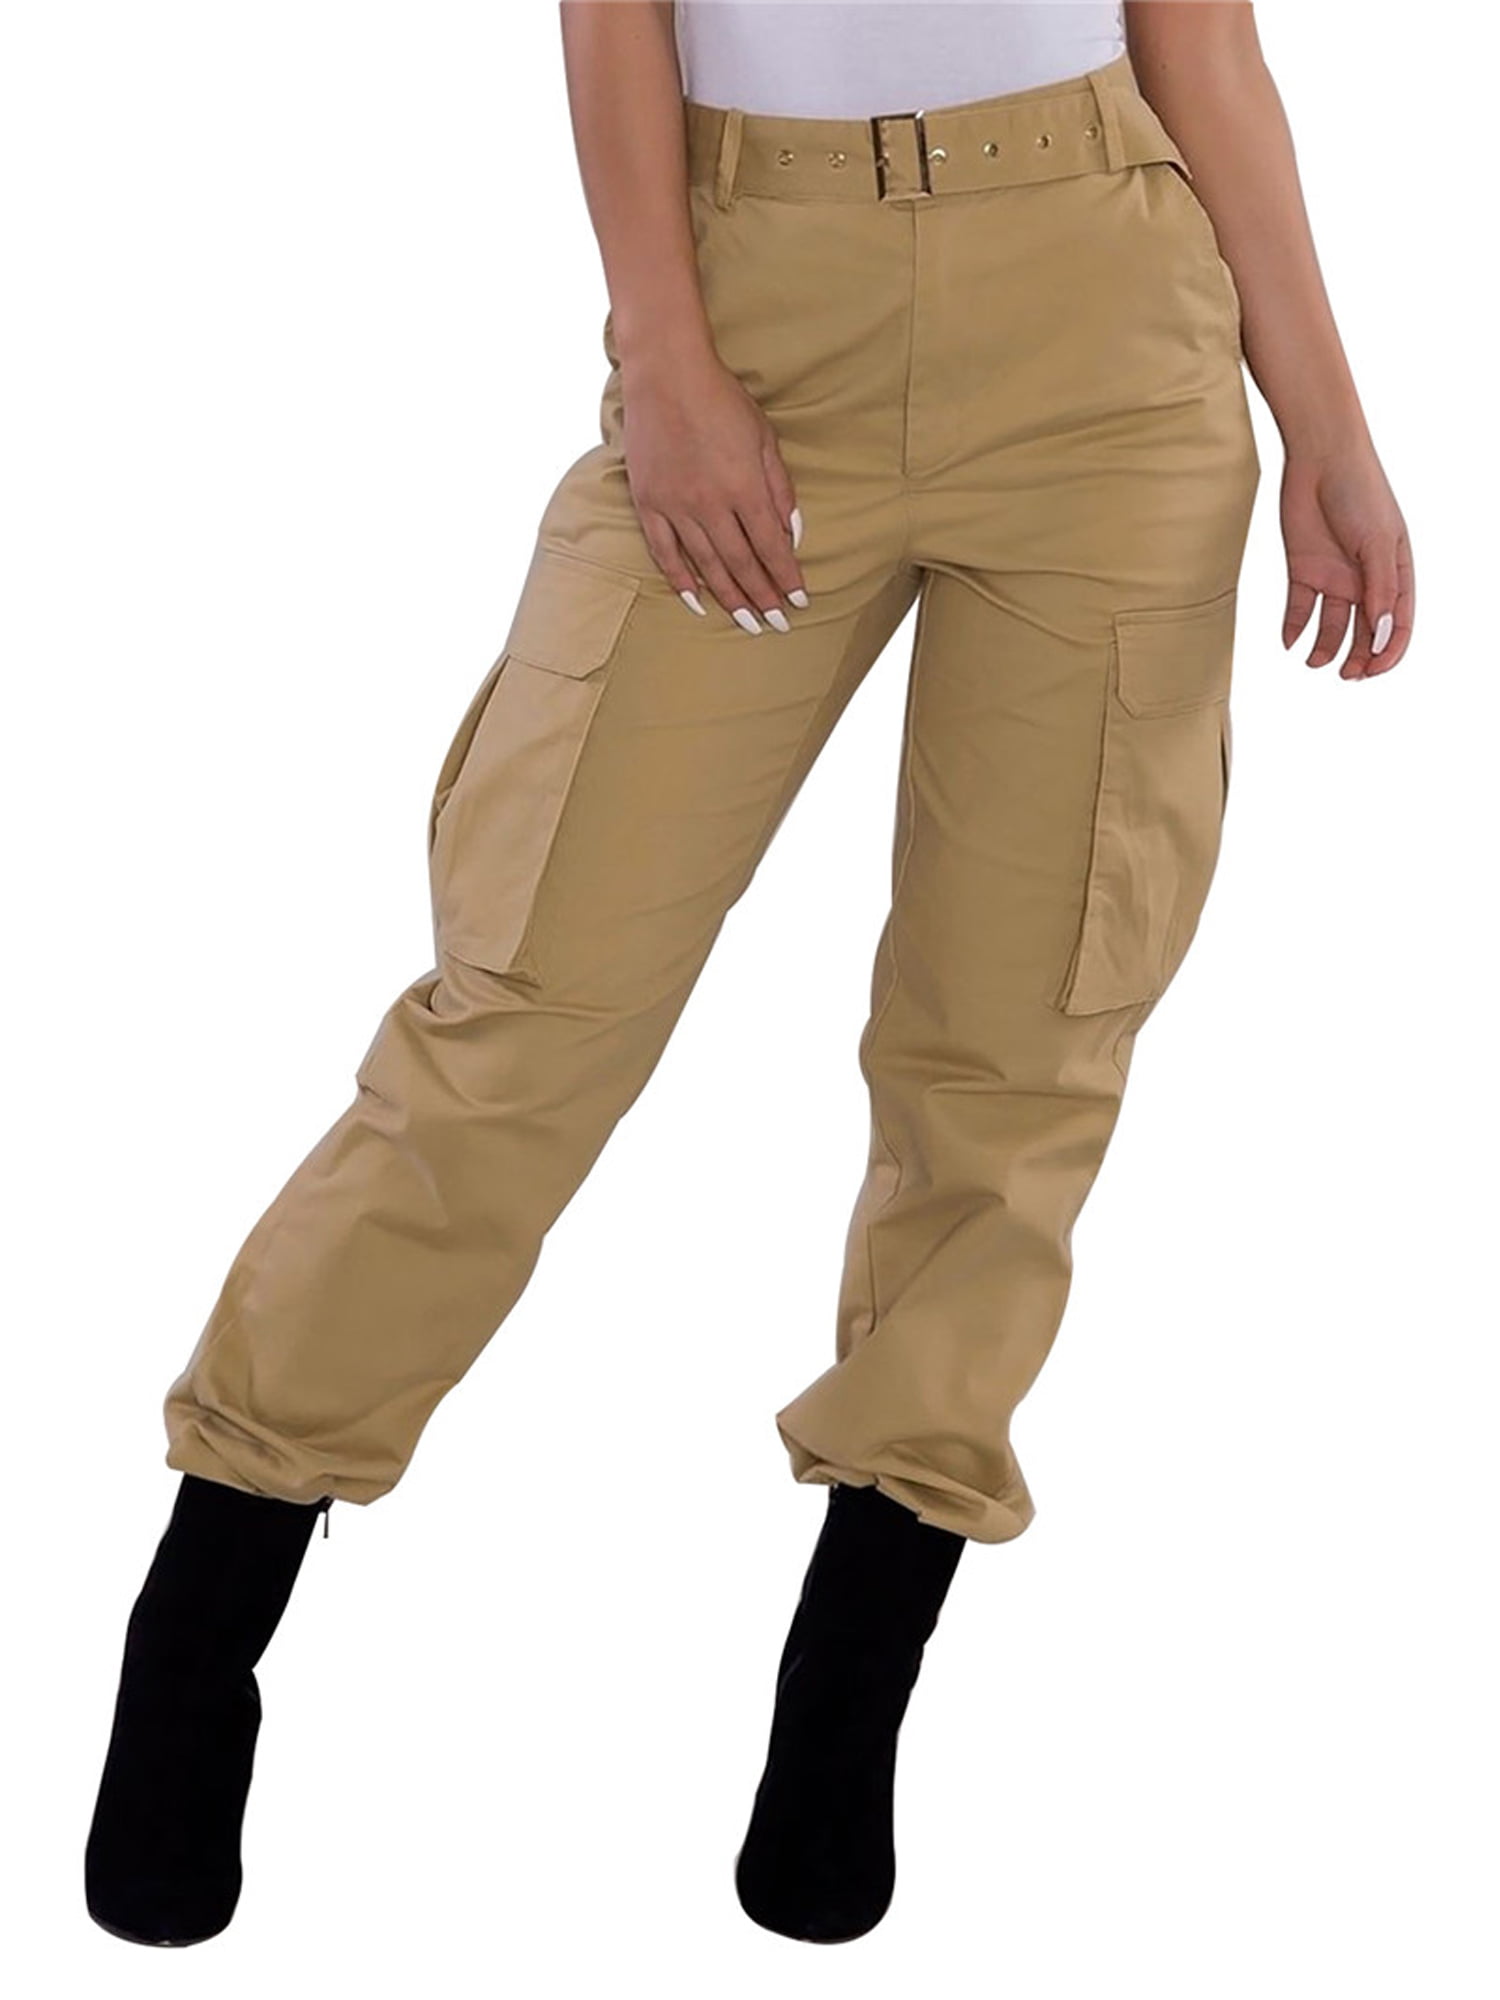 Zaful Cotton Solid Pockets Straight Cargo Pants in Light Coffee Slacks and Chinos Cargo trousers Brown Womens Clothing Trousers 